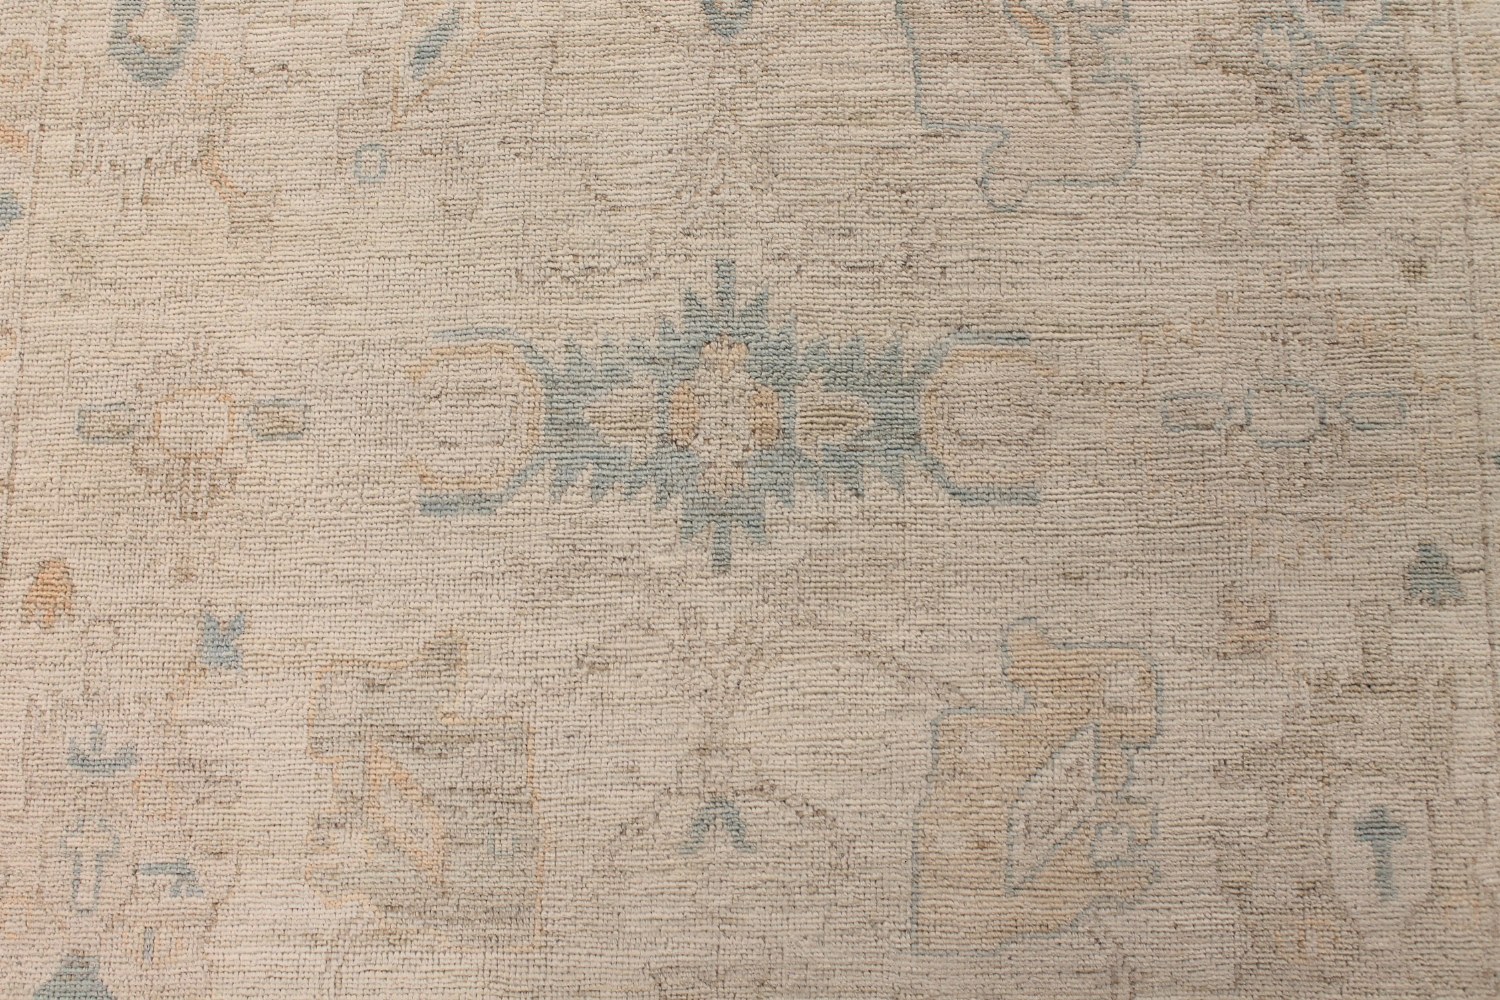 6x9 Oushak Hand Knotted Wool Area Rug - MR028082